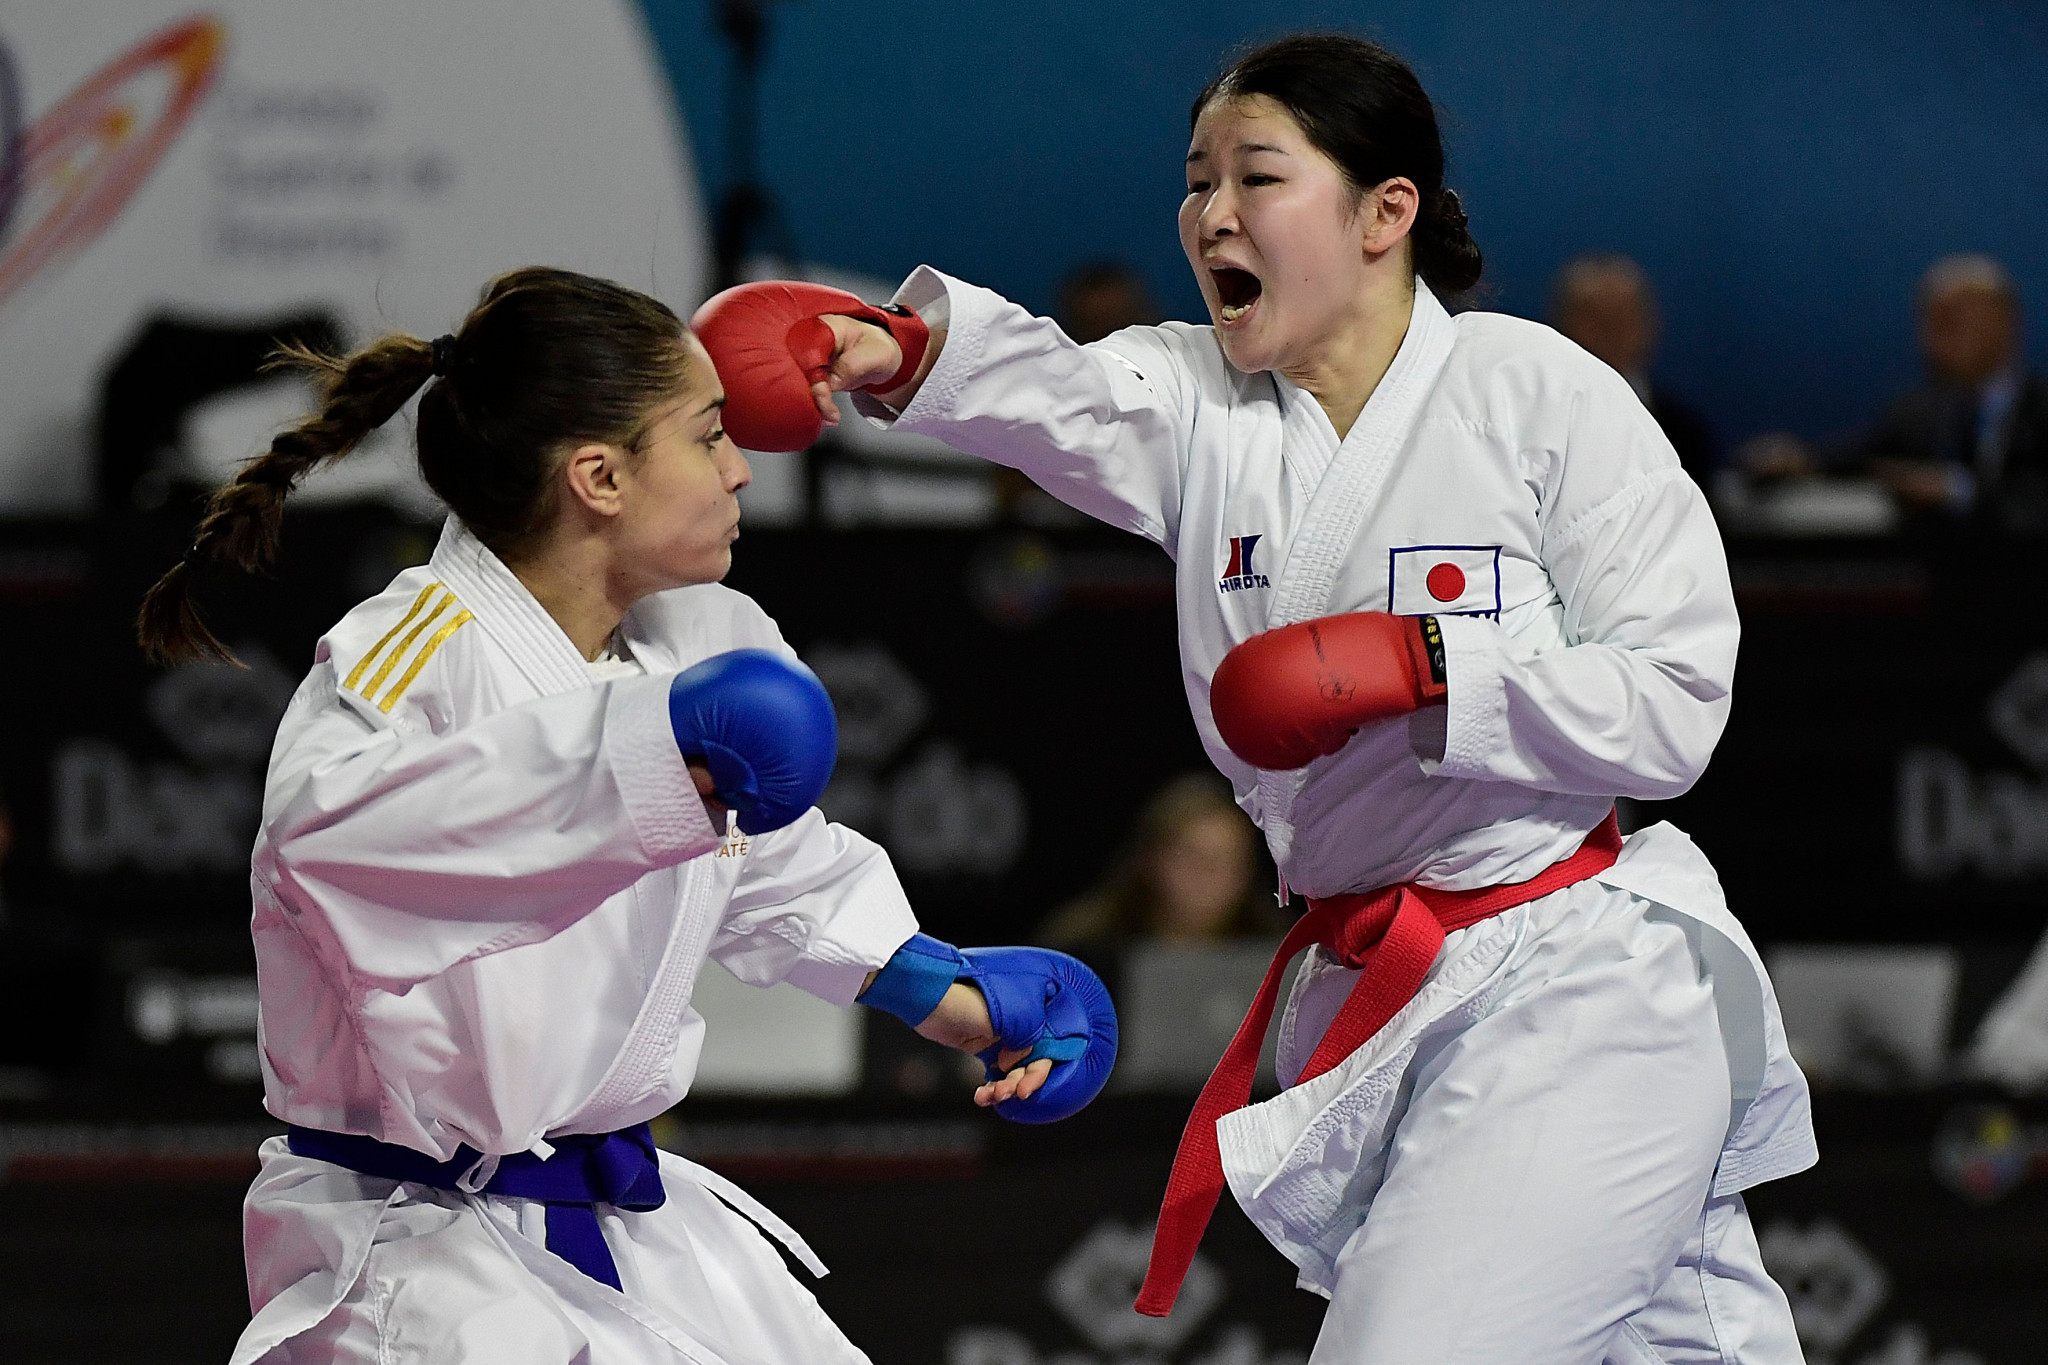 Karate is set to make its Olympic debut at Tokyo 2020 ©Getty Images